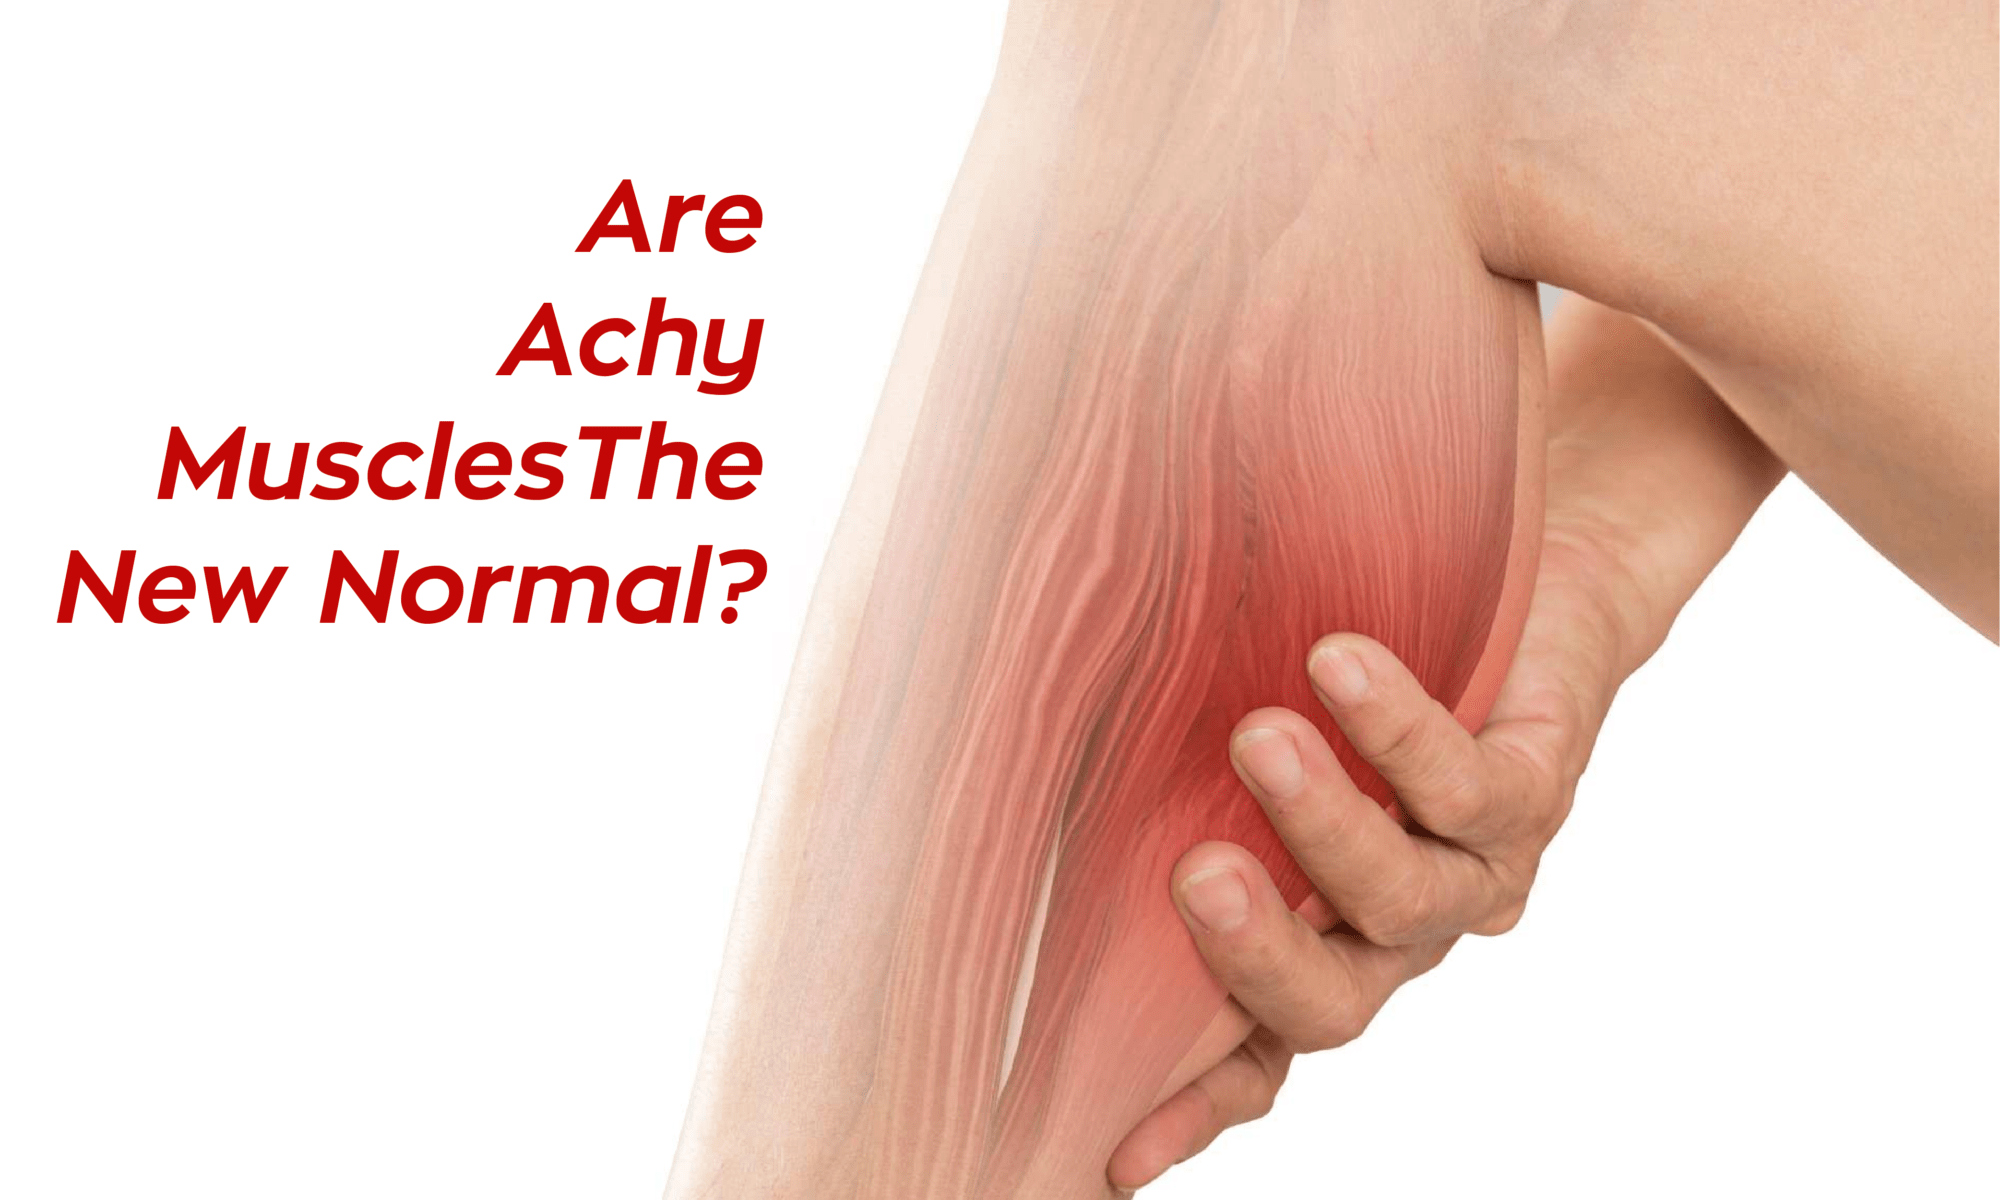 Are Achy Muscles New Normal?